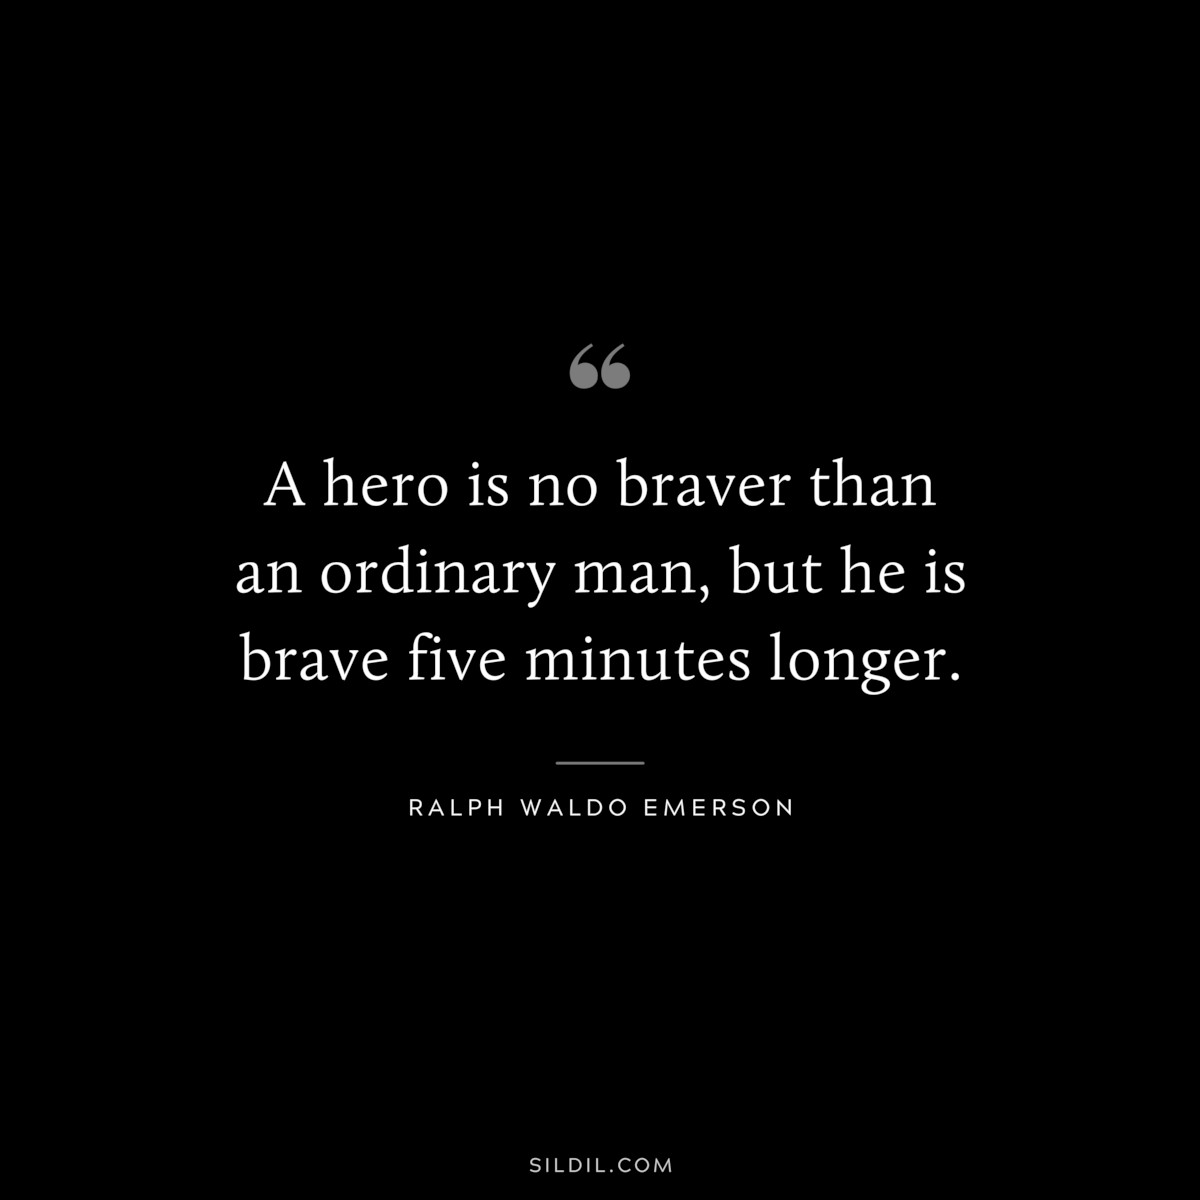 A hero is no braver than an ordinary man, but he is brave five minutes longer. ― Ralph Waldo Emerson